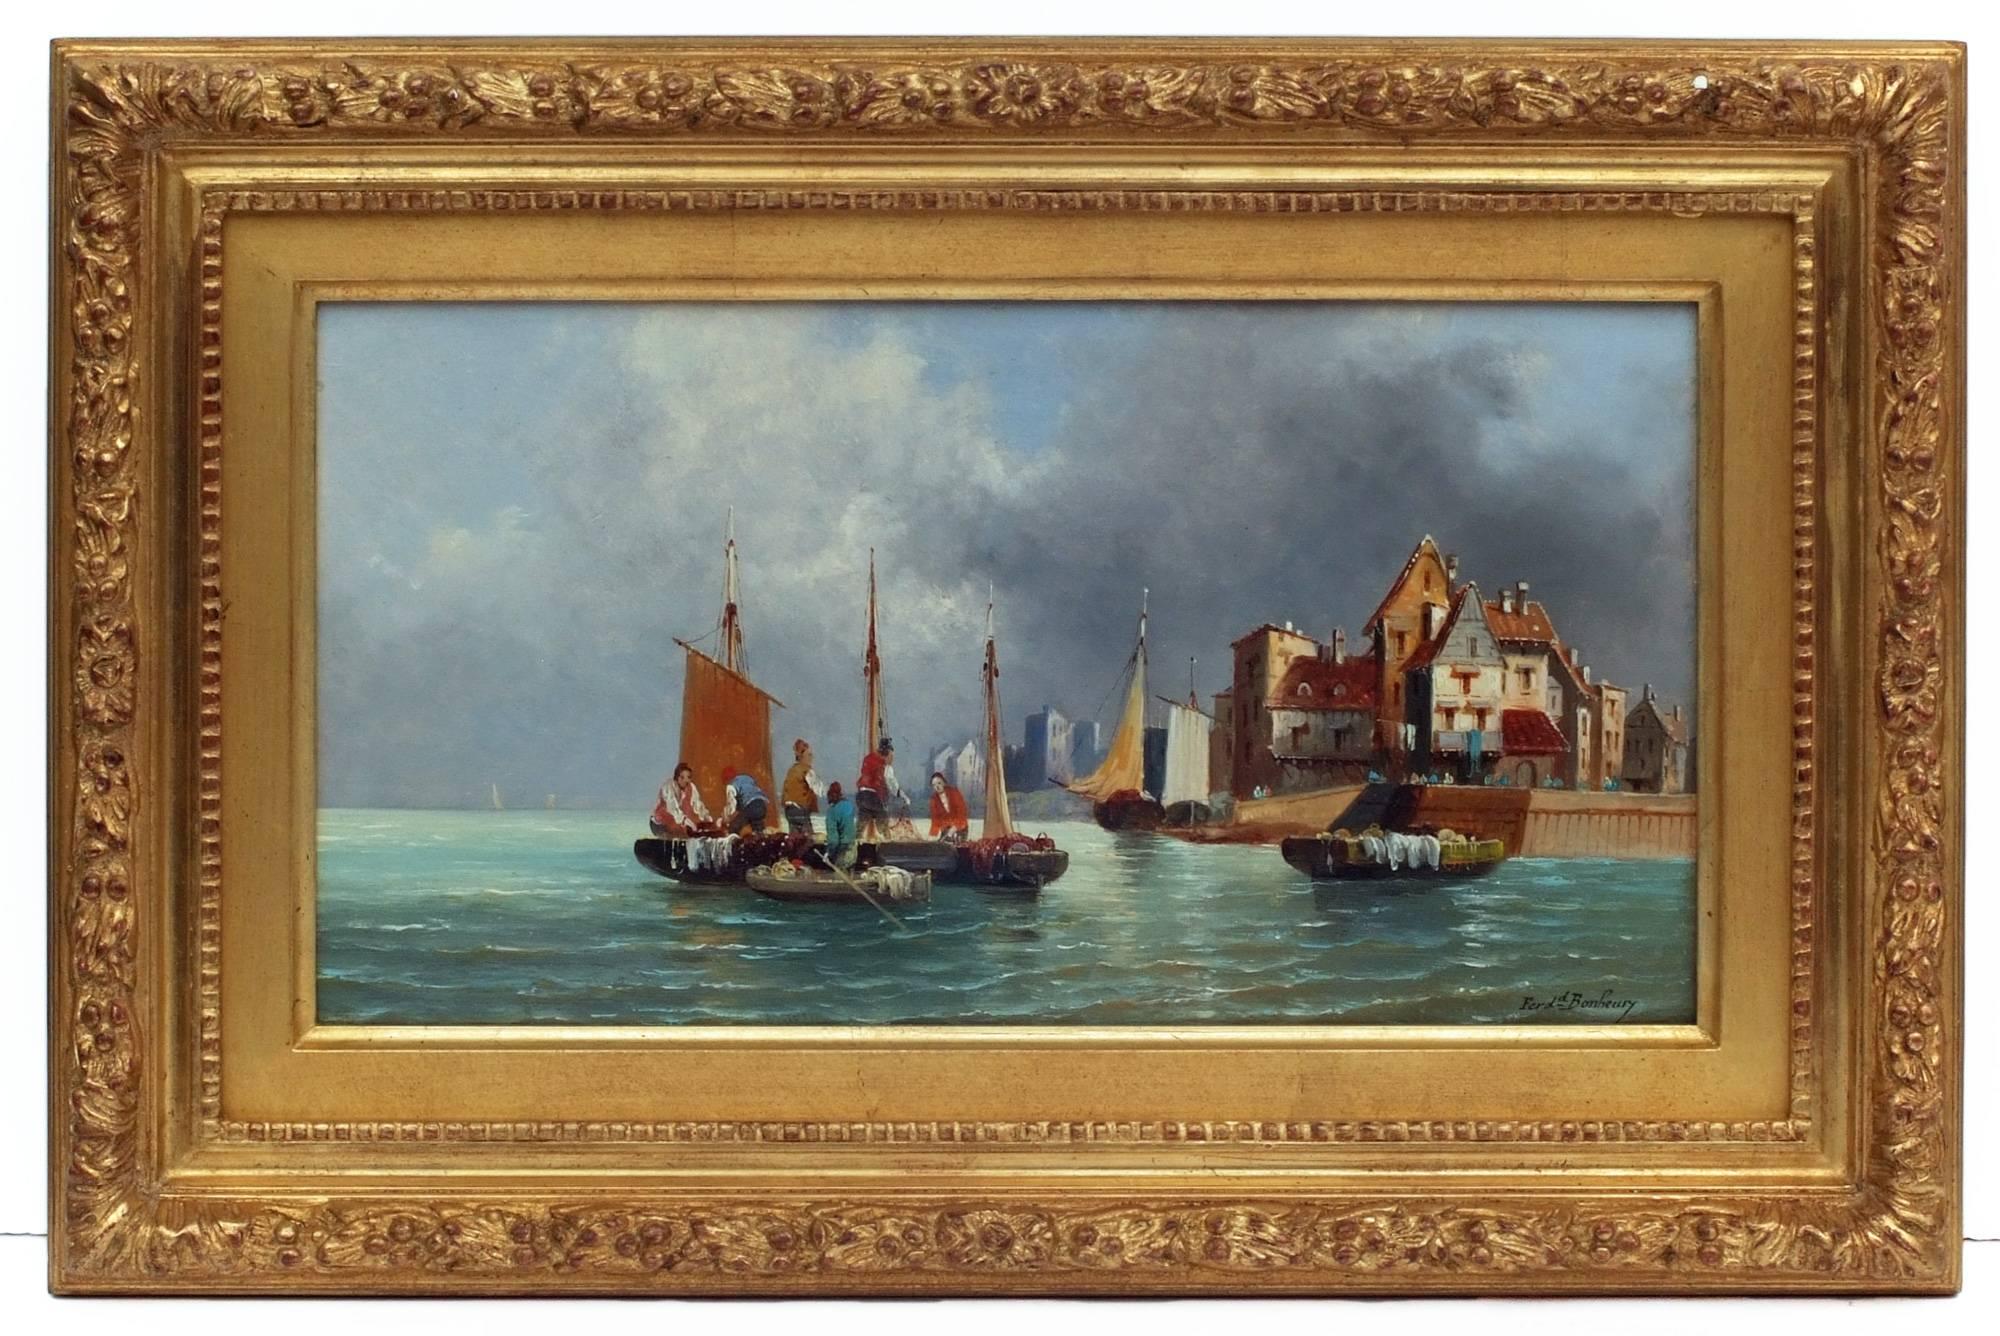 Ferdinand Bonheur (1817-1887)
Lively Marines near the coast in pair
Two oils on wood panels
Only one is signed low right
Framed by Gault (Paris)
Dim wood (each) : 22 X 41 cm
Dim frame (each) : 36 X 55 cm

BONHEUR Ferdinand (1817 - 1887)
19th century